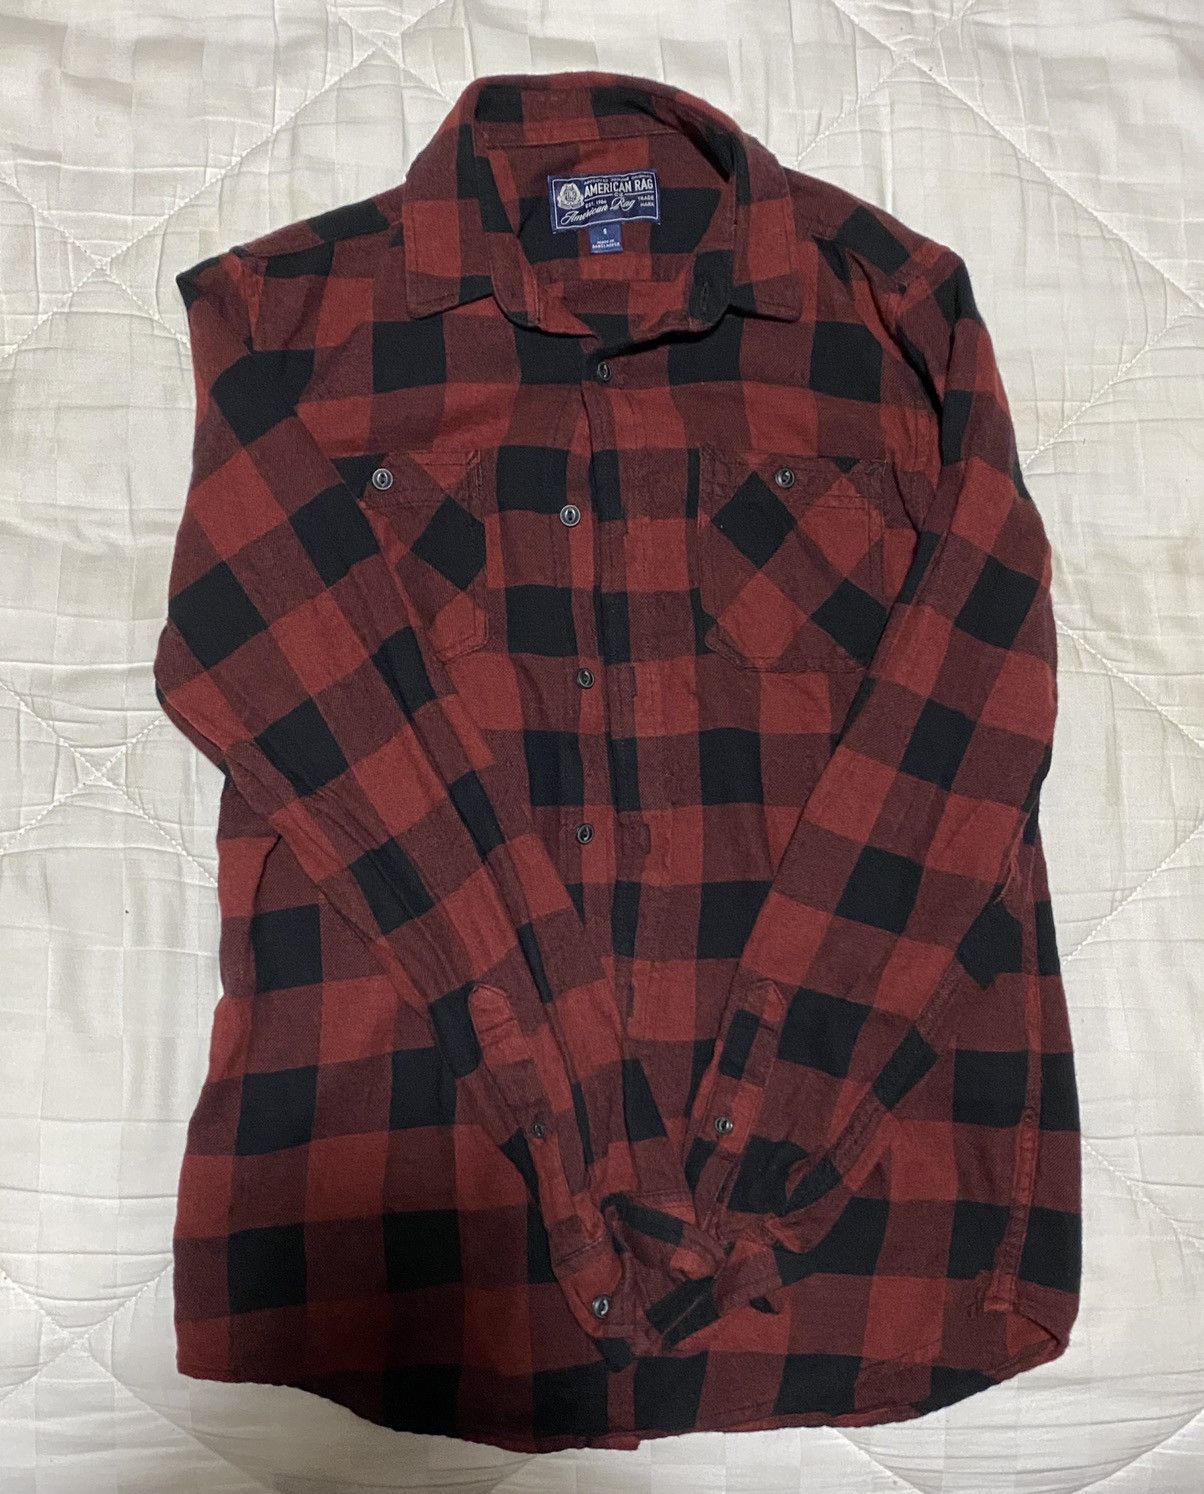 American Rag American Rag Flannel Black and Red Size US S / EU 44-46 / 1 - 2 Preview